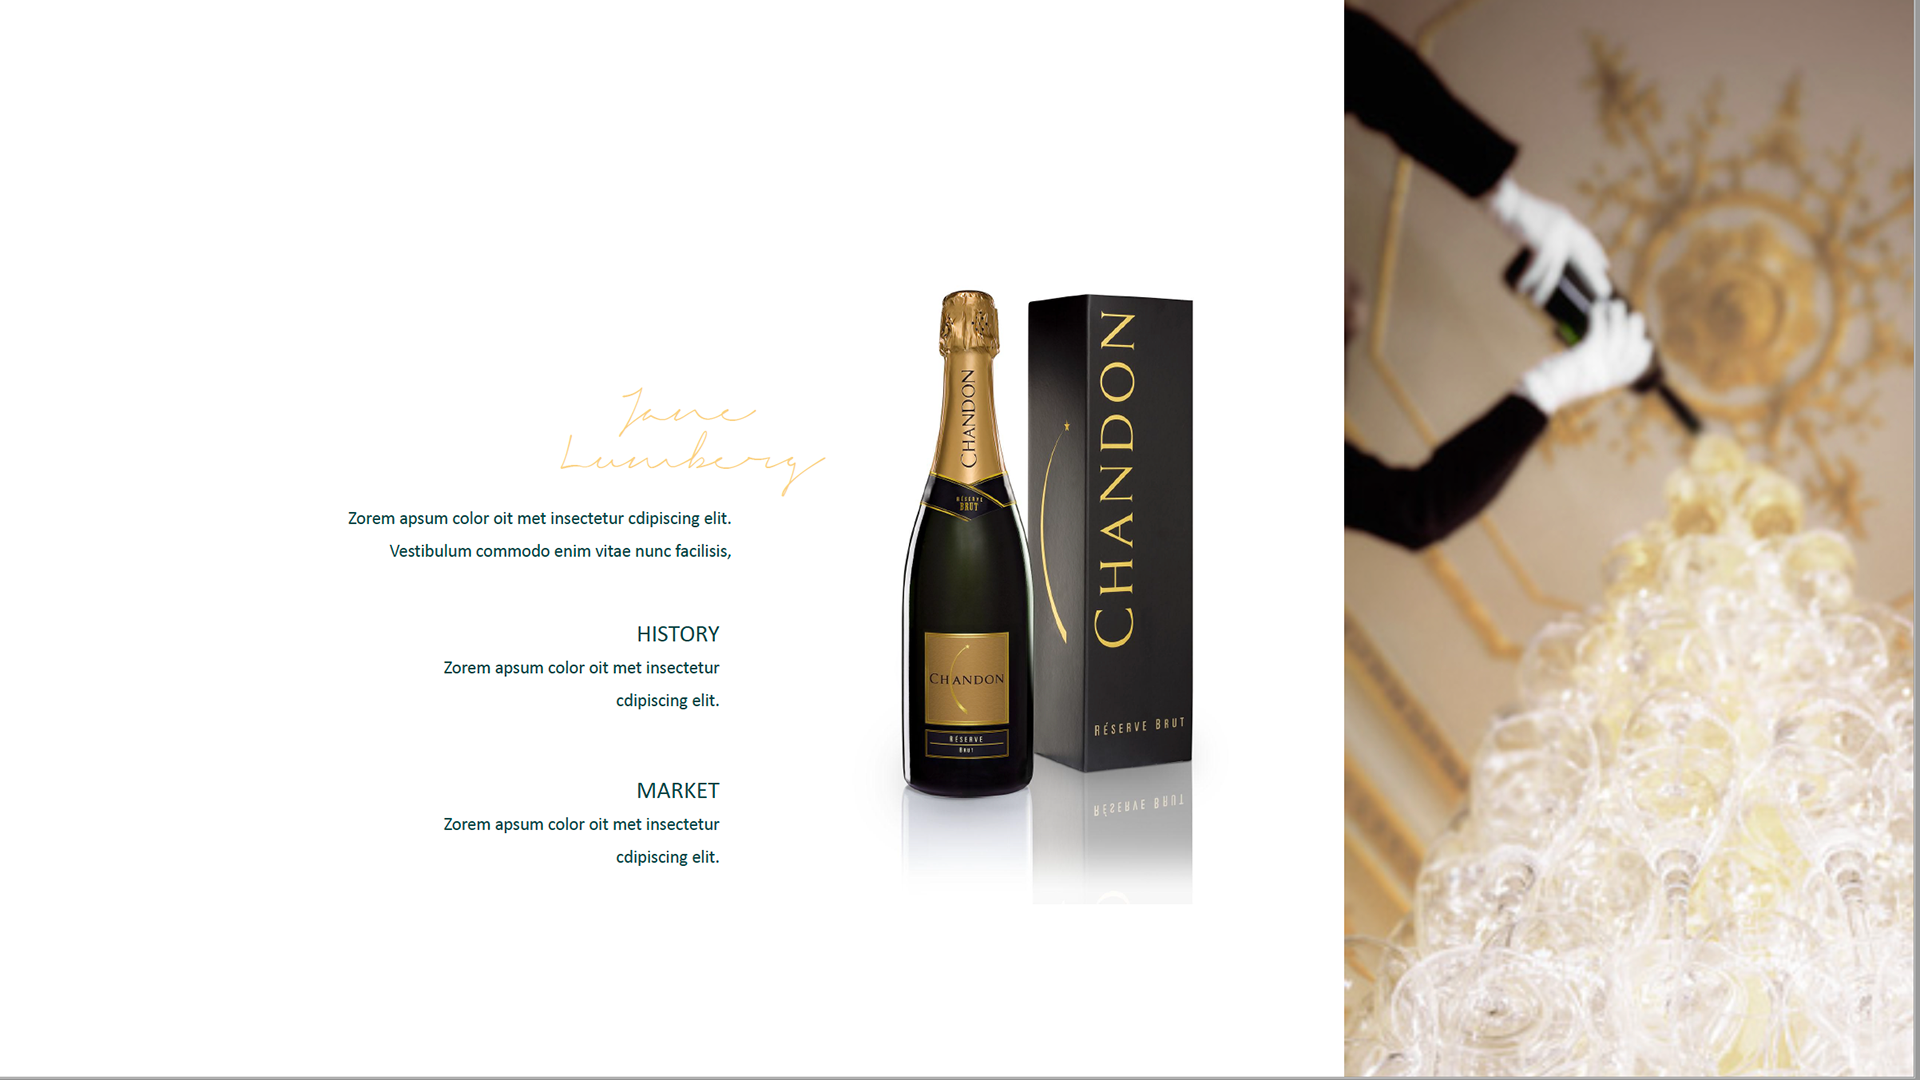 Fan Mail from Louis Vuitton Moet Hennessey - Remixologists